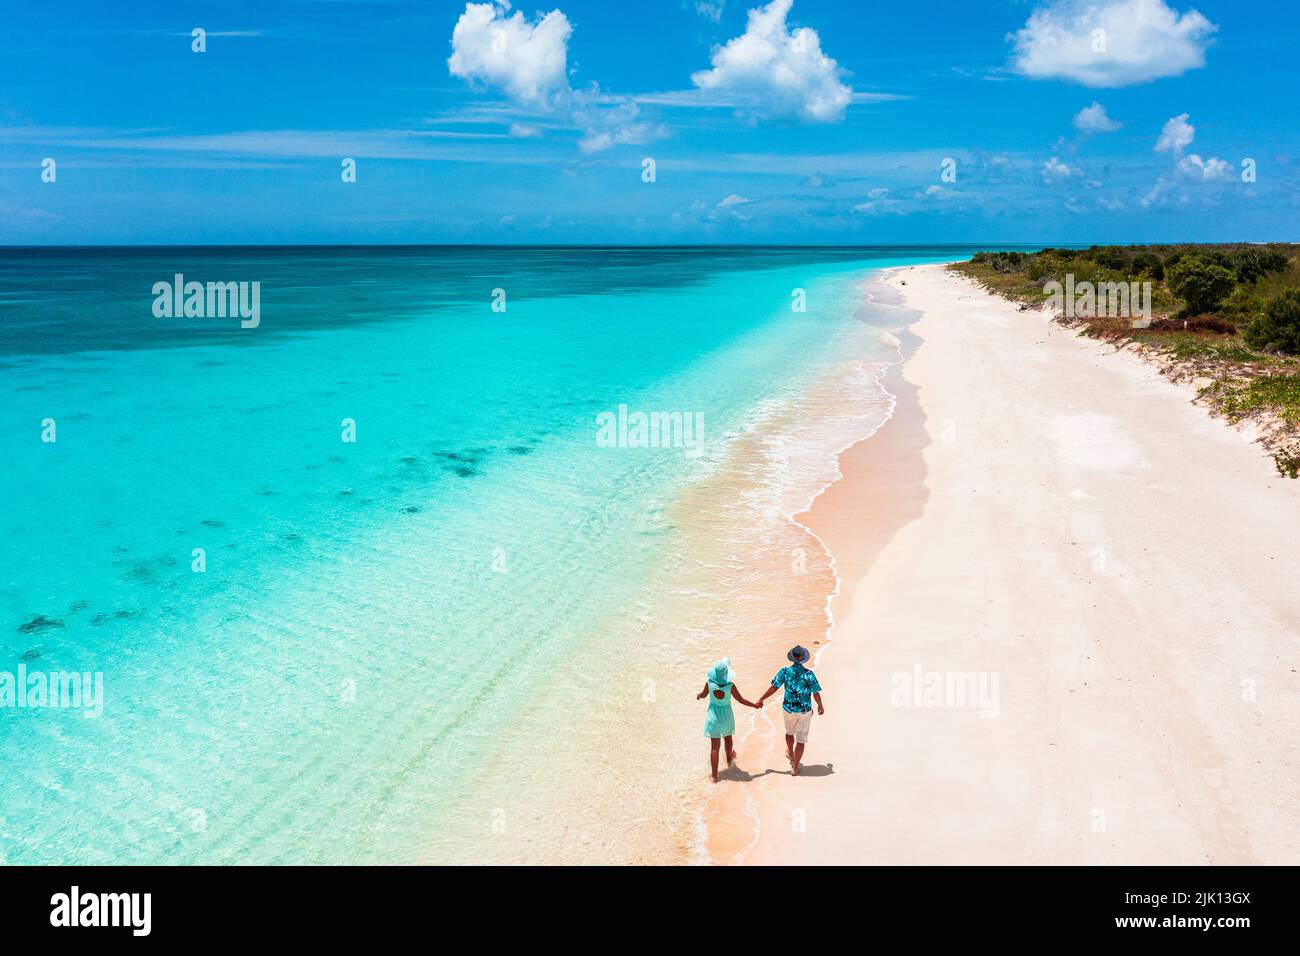 Man and woman walking hand in hand on a beach washed by the turquoise sea, Barbuda, Antigua and Barbuda, West Indies, Caribbean, Central America Stock Photo